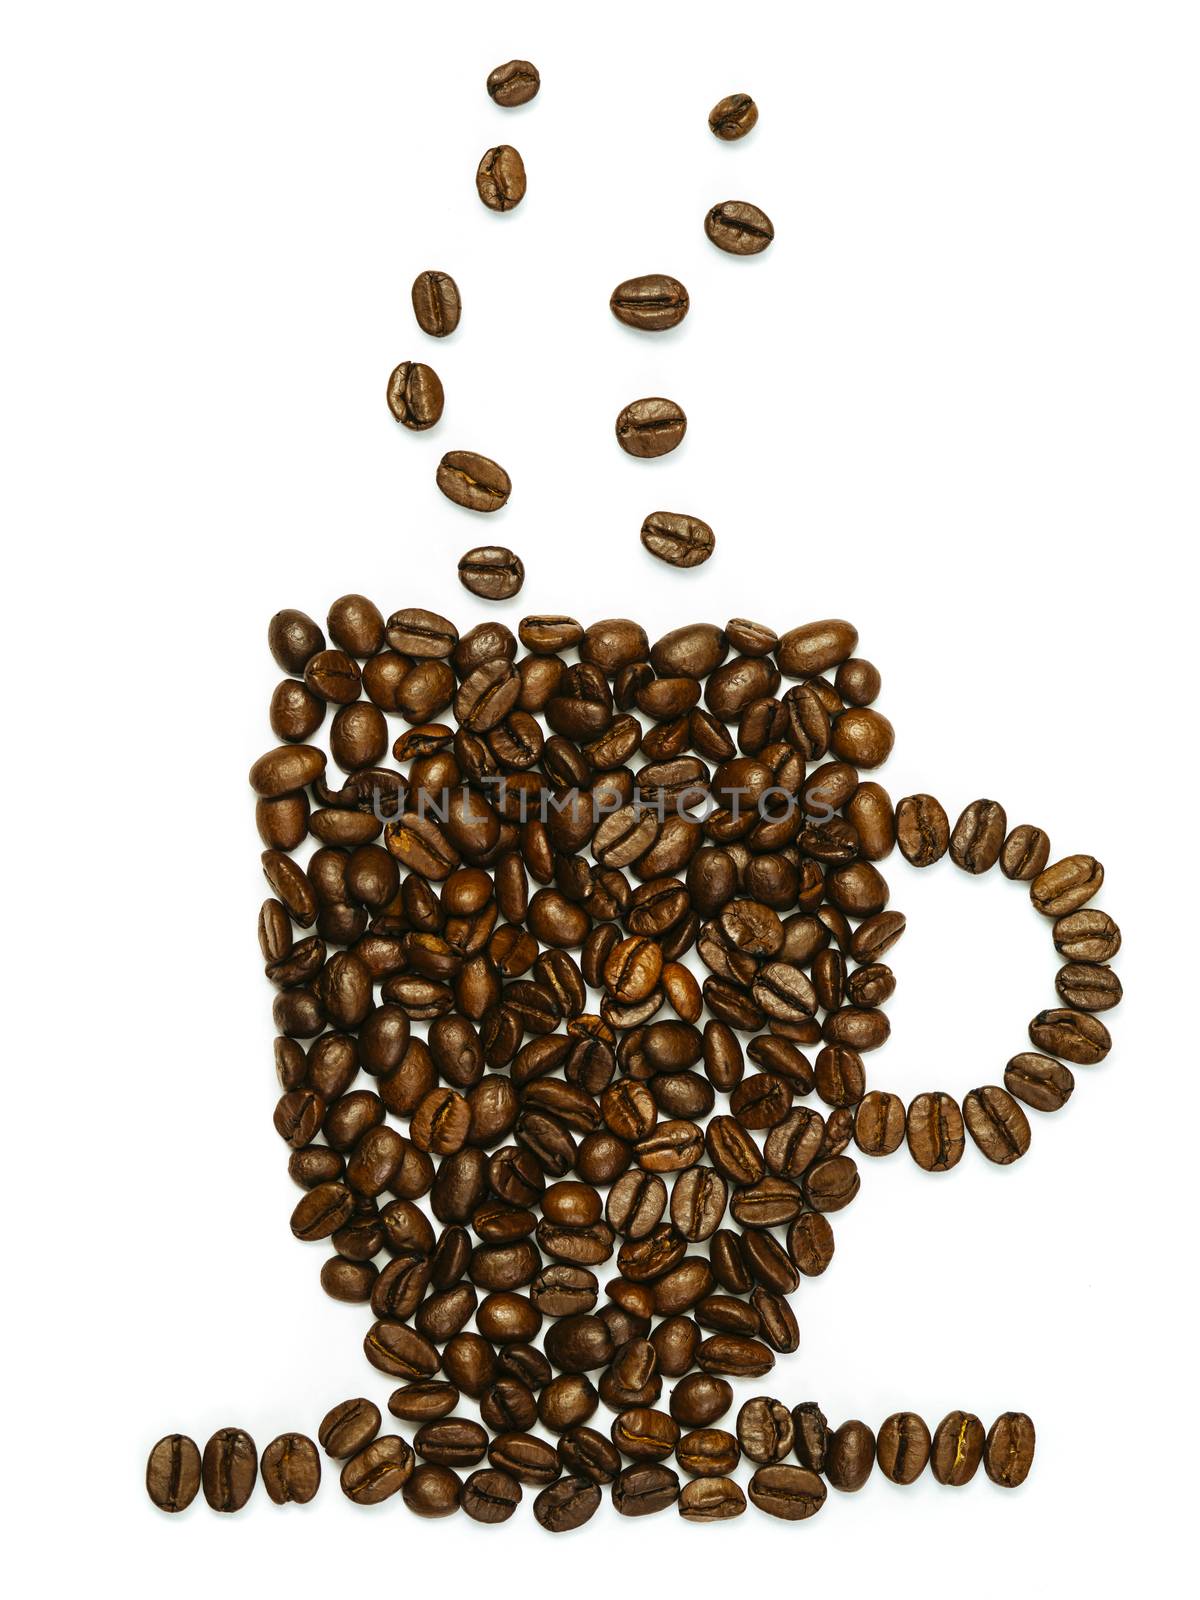 Cup shape with coffee beans by sumners